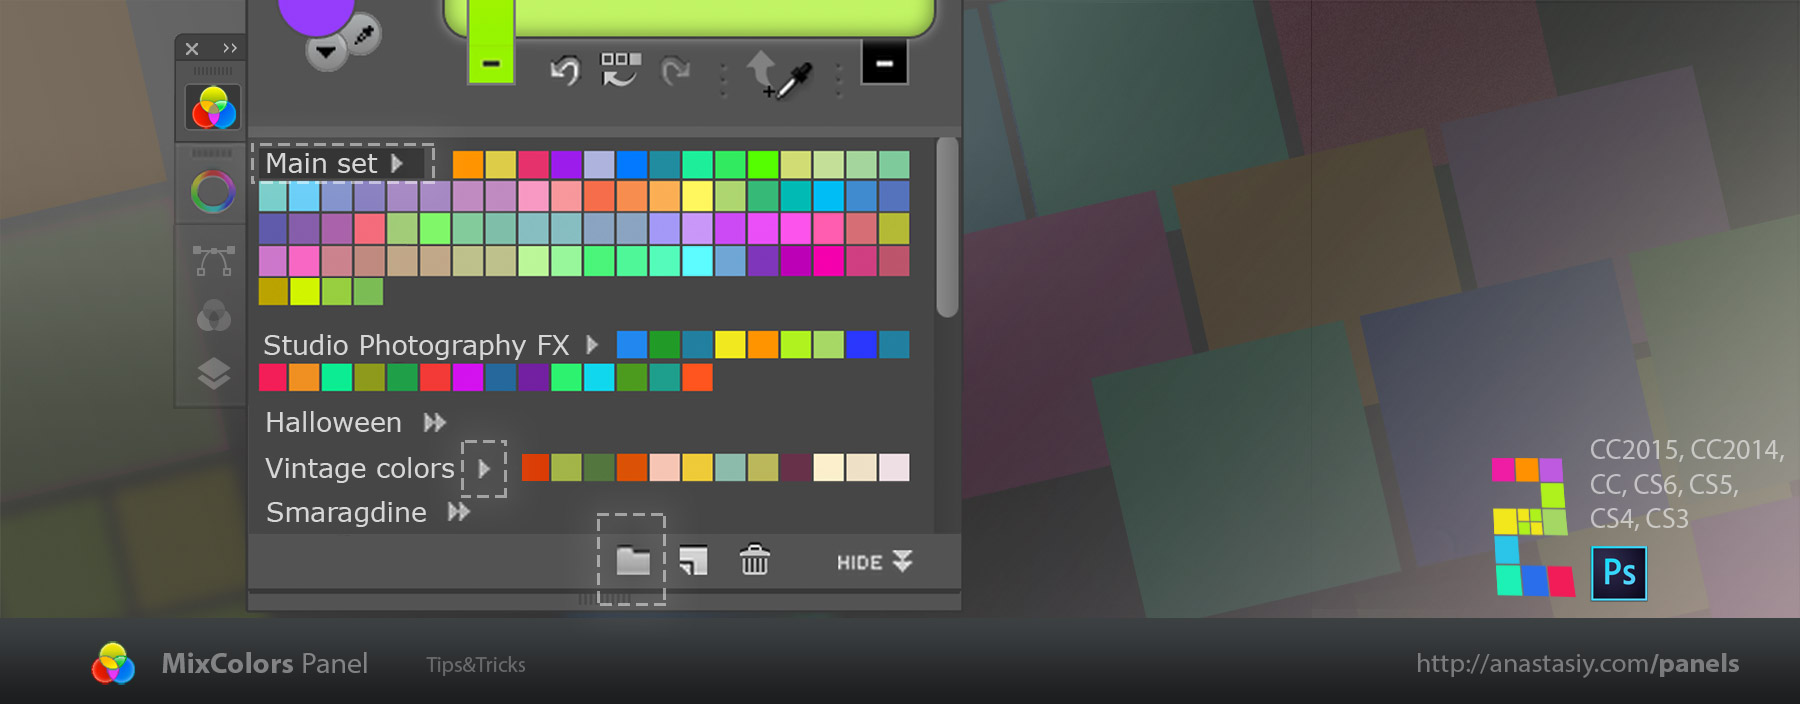 MixColors panel with swatch color groups in Photoshop